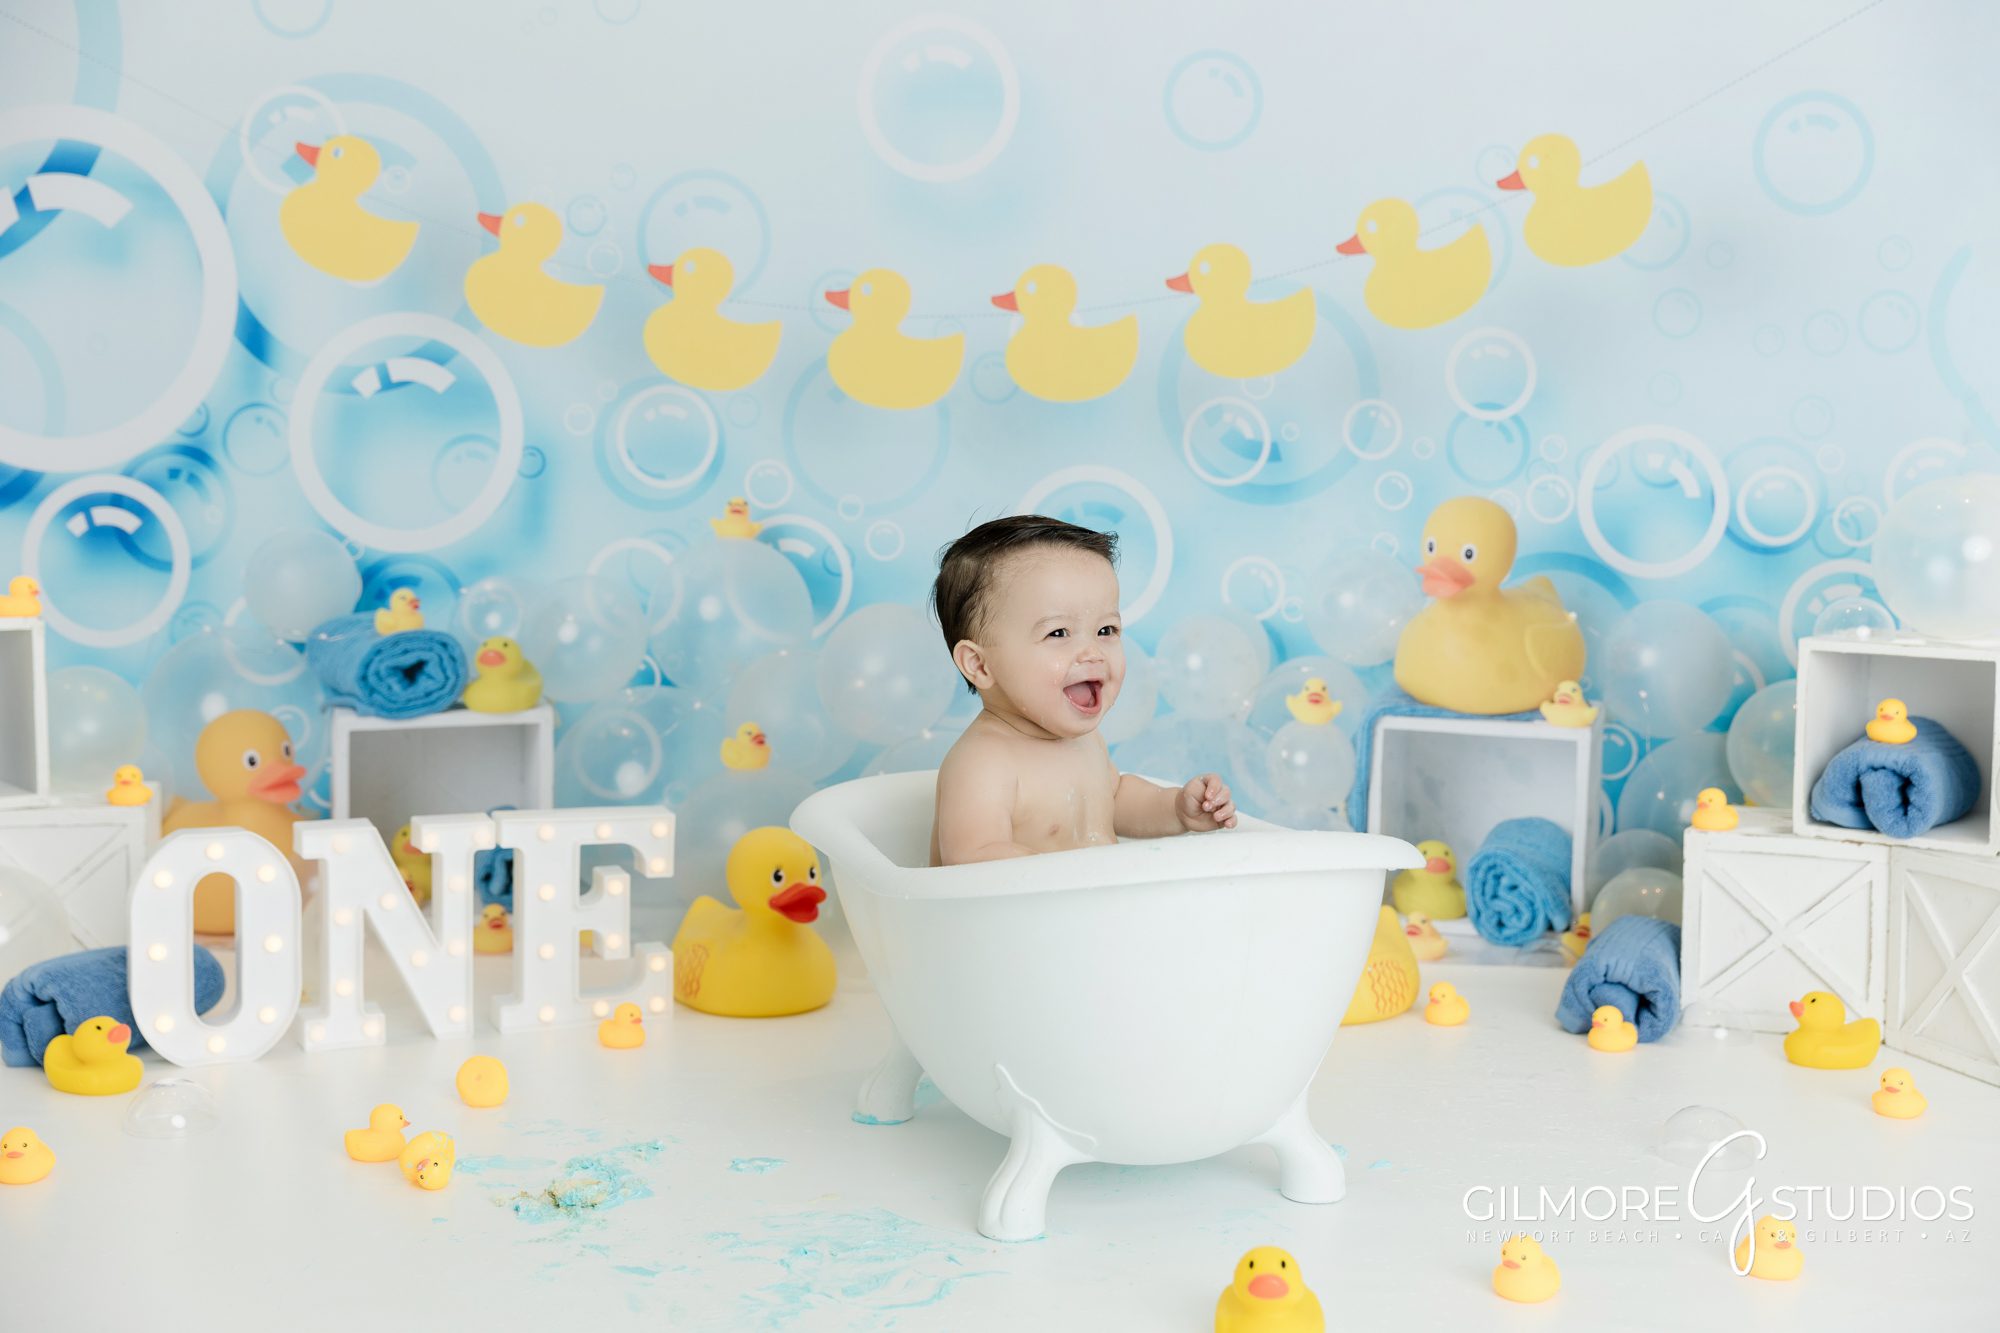 Rubber Ducky Cake Smash Photography Session, Gilbert Children's Photographer, Queen Creek Baby Photo Studio, Gilmore Studios, Yellow rubber ducky, bath, bubbles, set design, props, baby outfit, 1 year old, one year old boy, cake, bowtie, photo